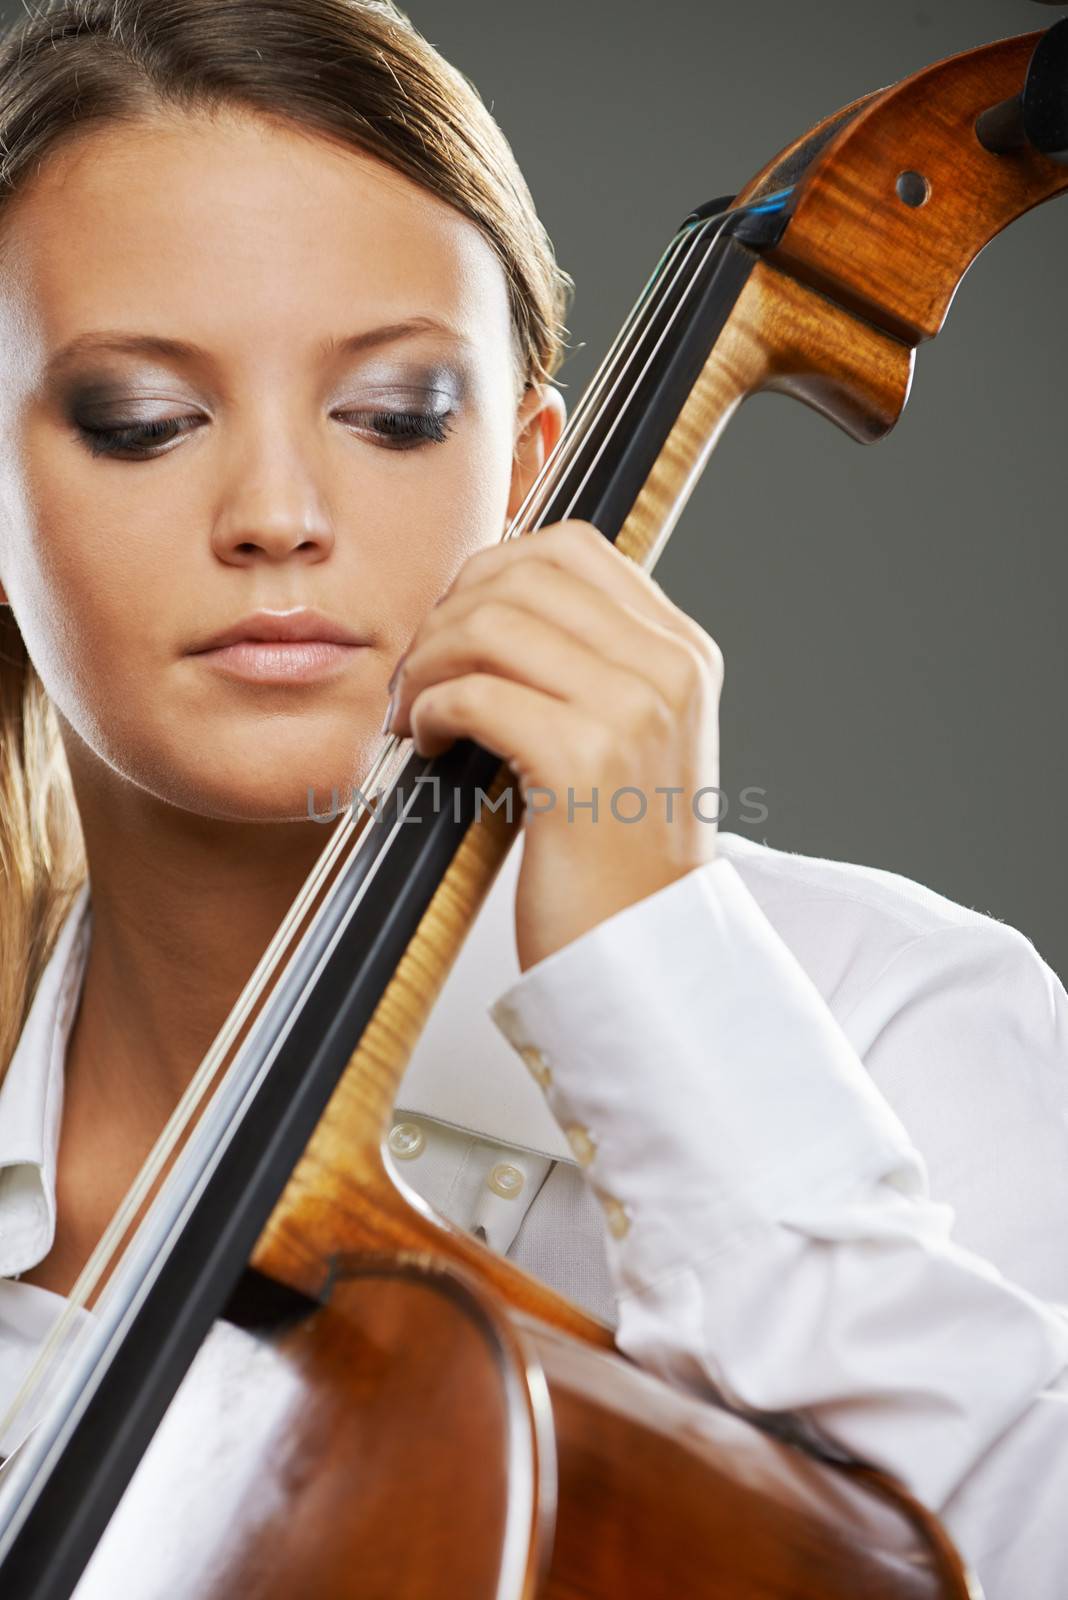 Close up portrait of a blond woman playing cello